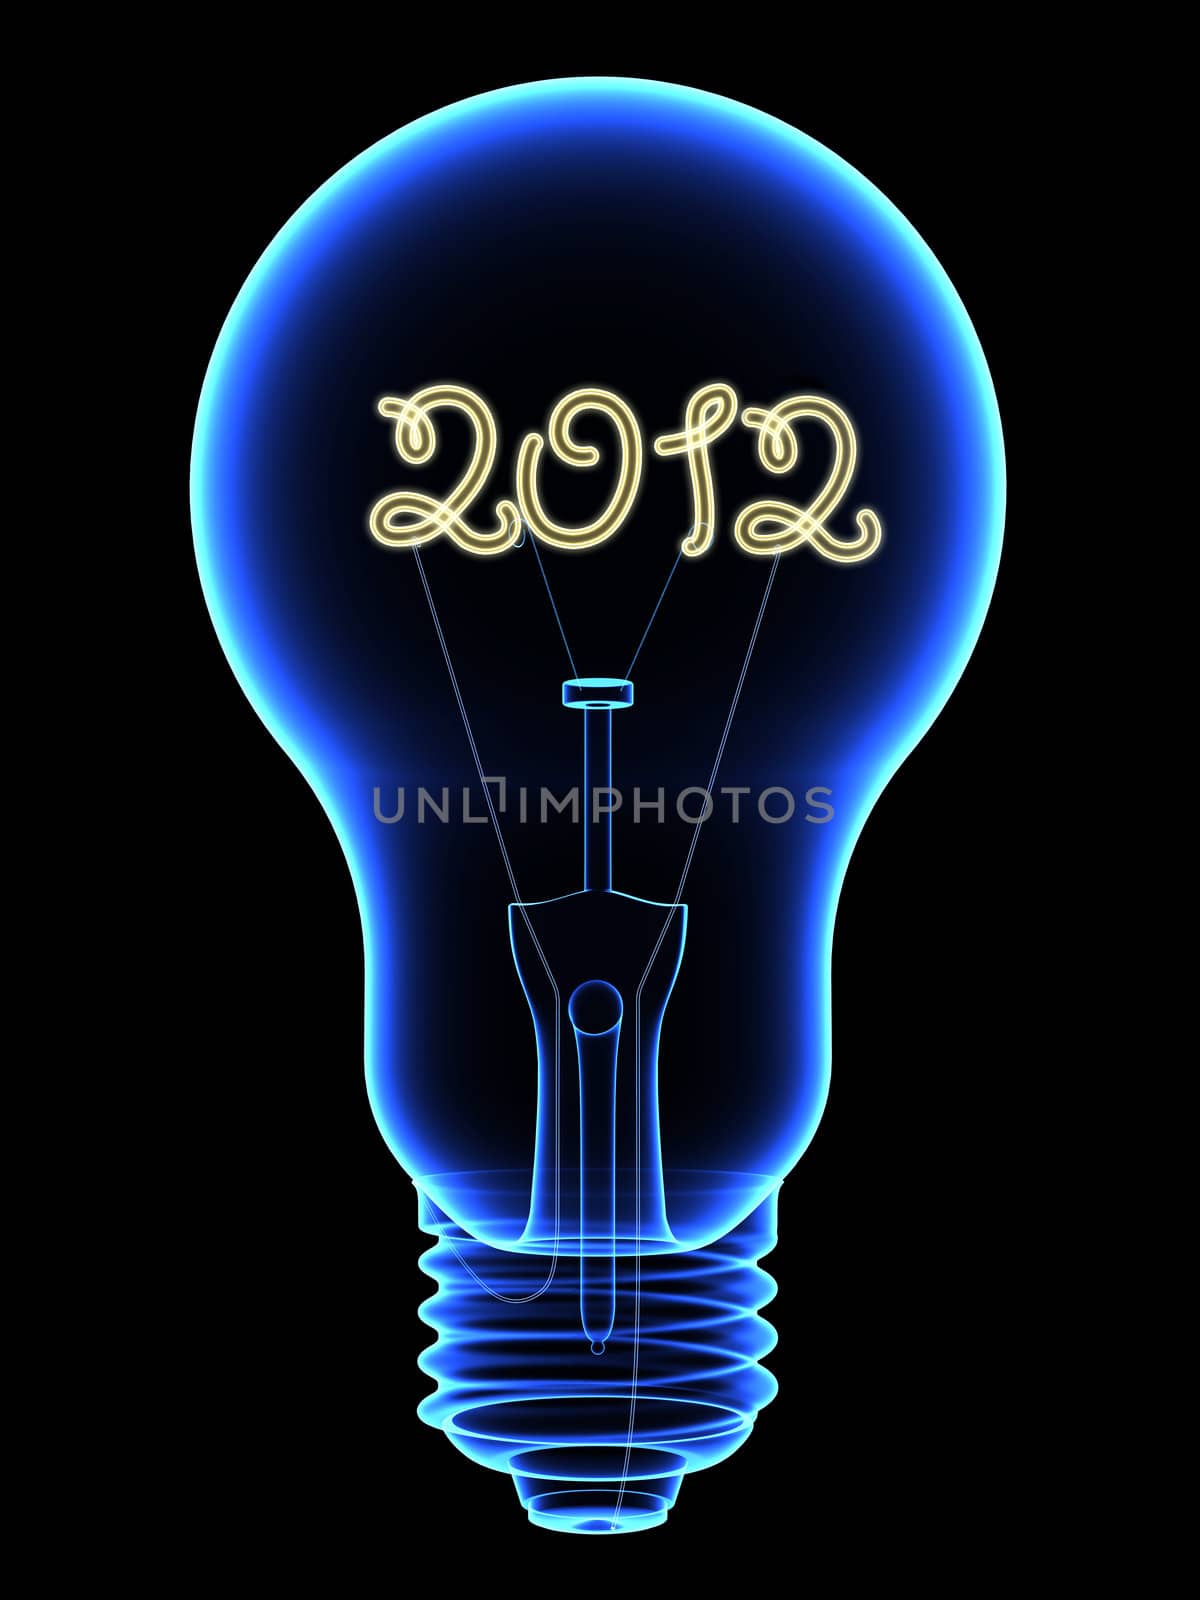 X-Ray lightbulb with sparkling 2012 digits inside isolated on black. High resolution 3D image